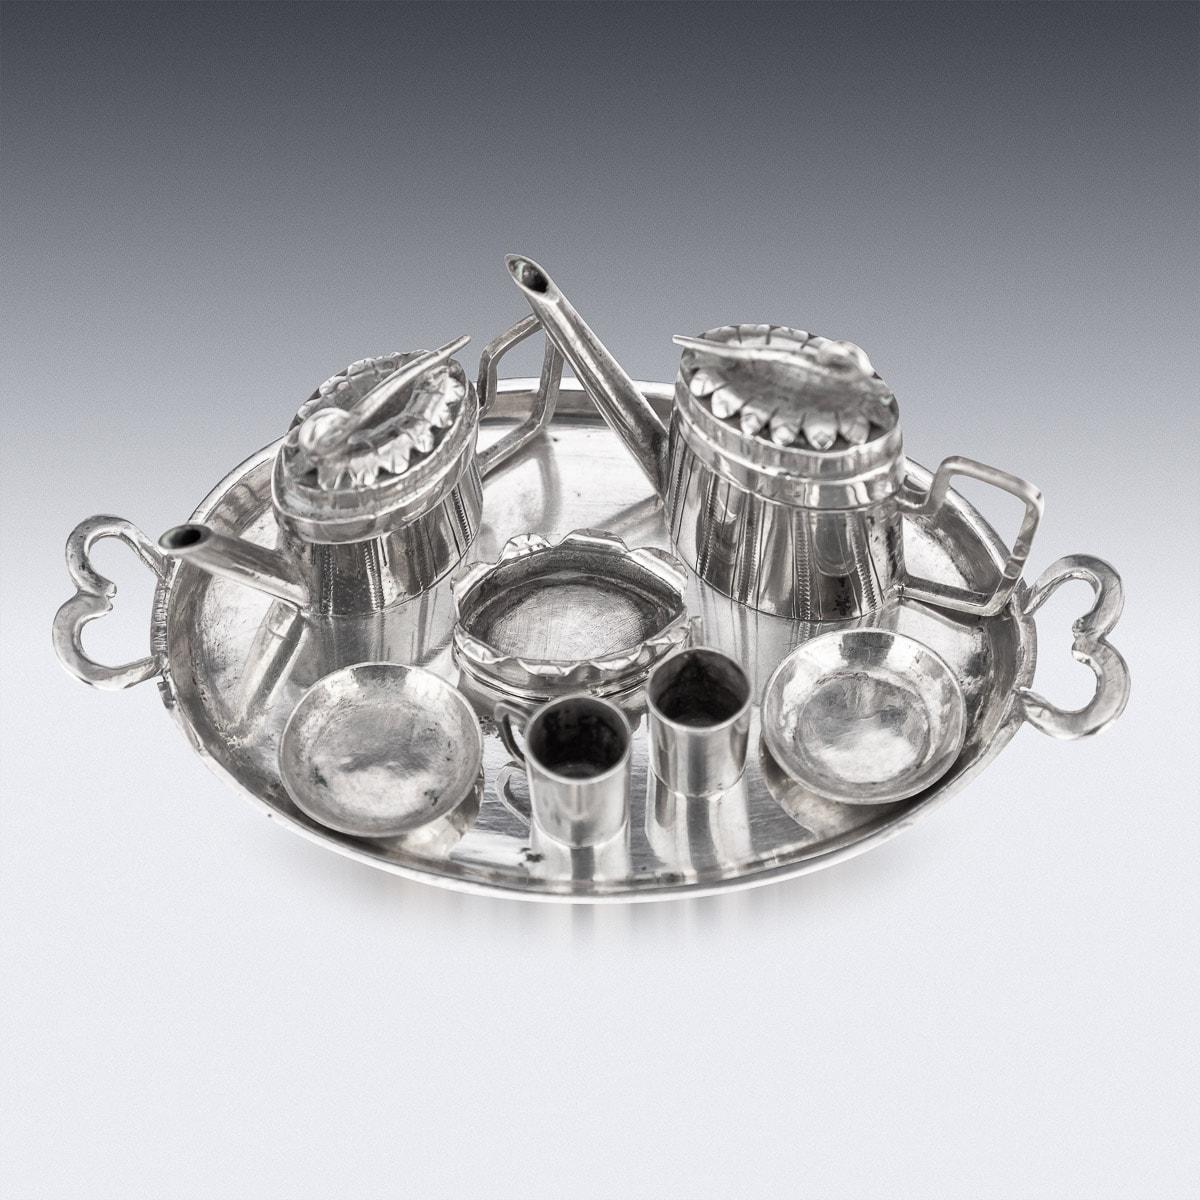 19th Century German Miniature Silver Tea & Coffee Service, c.1860 In Good Condition For Sale In Royal Tunbridge Wells, Kent